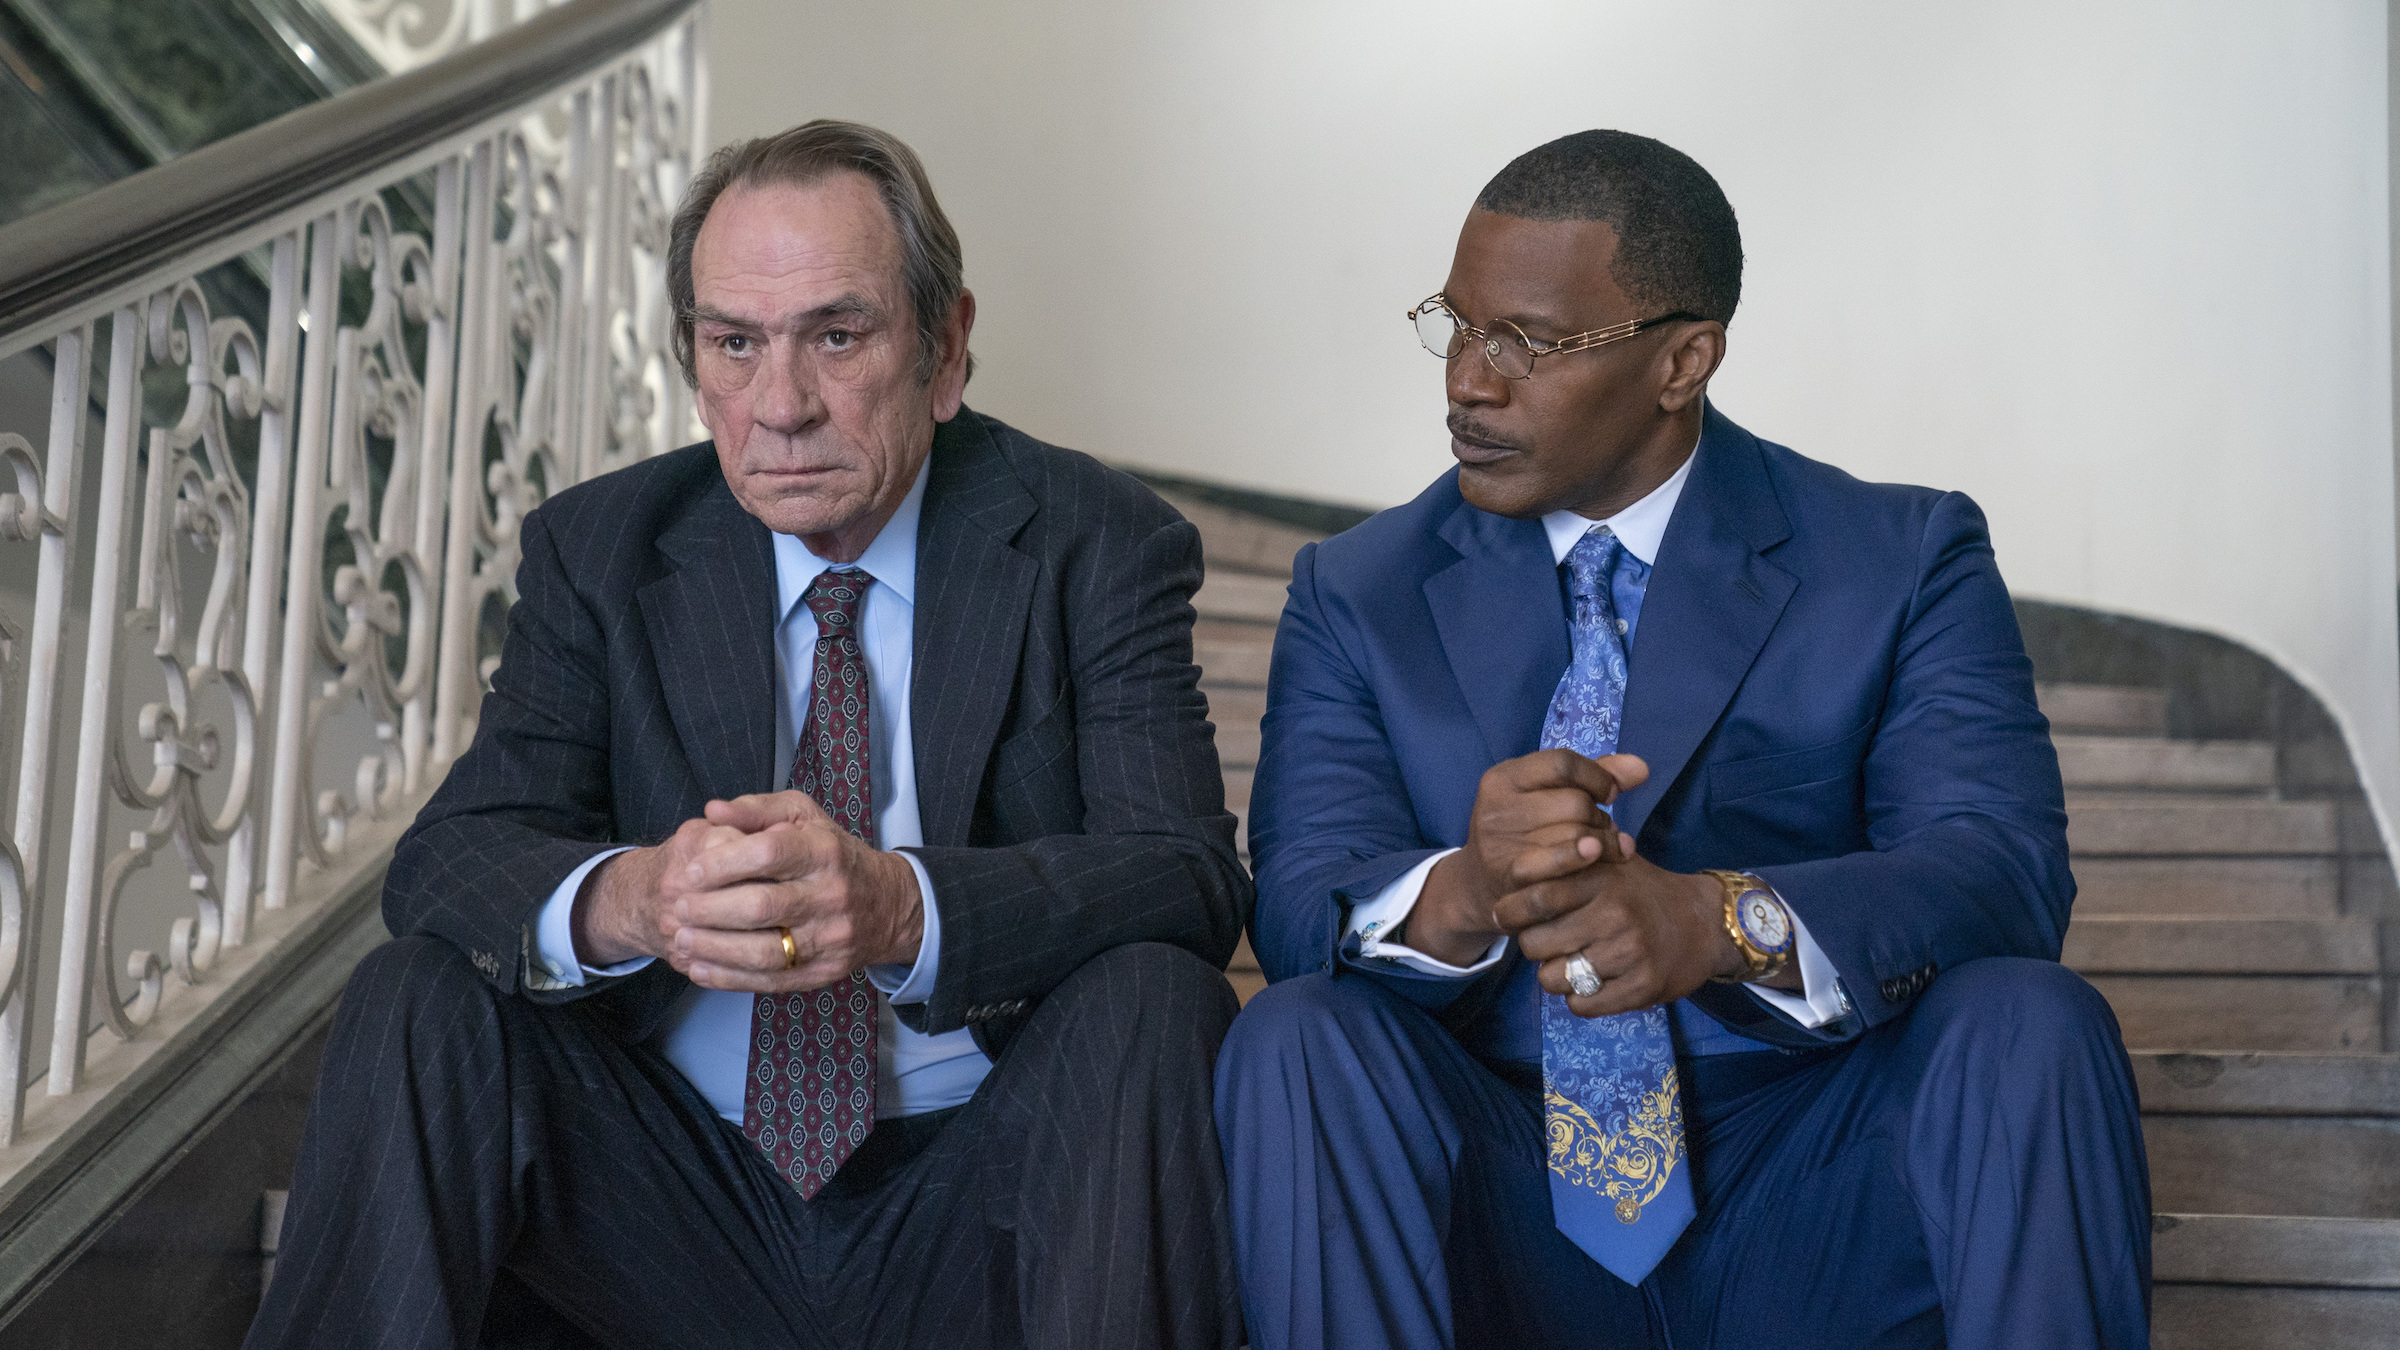 Tommy Lee Jones as Jeremiah O’Keefe and Jamie Foxx as Willie Gary in <i>The Burial.</i> (Courtesy of Amazon Prime Video)